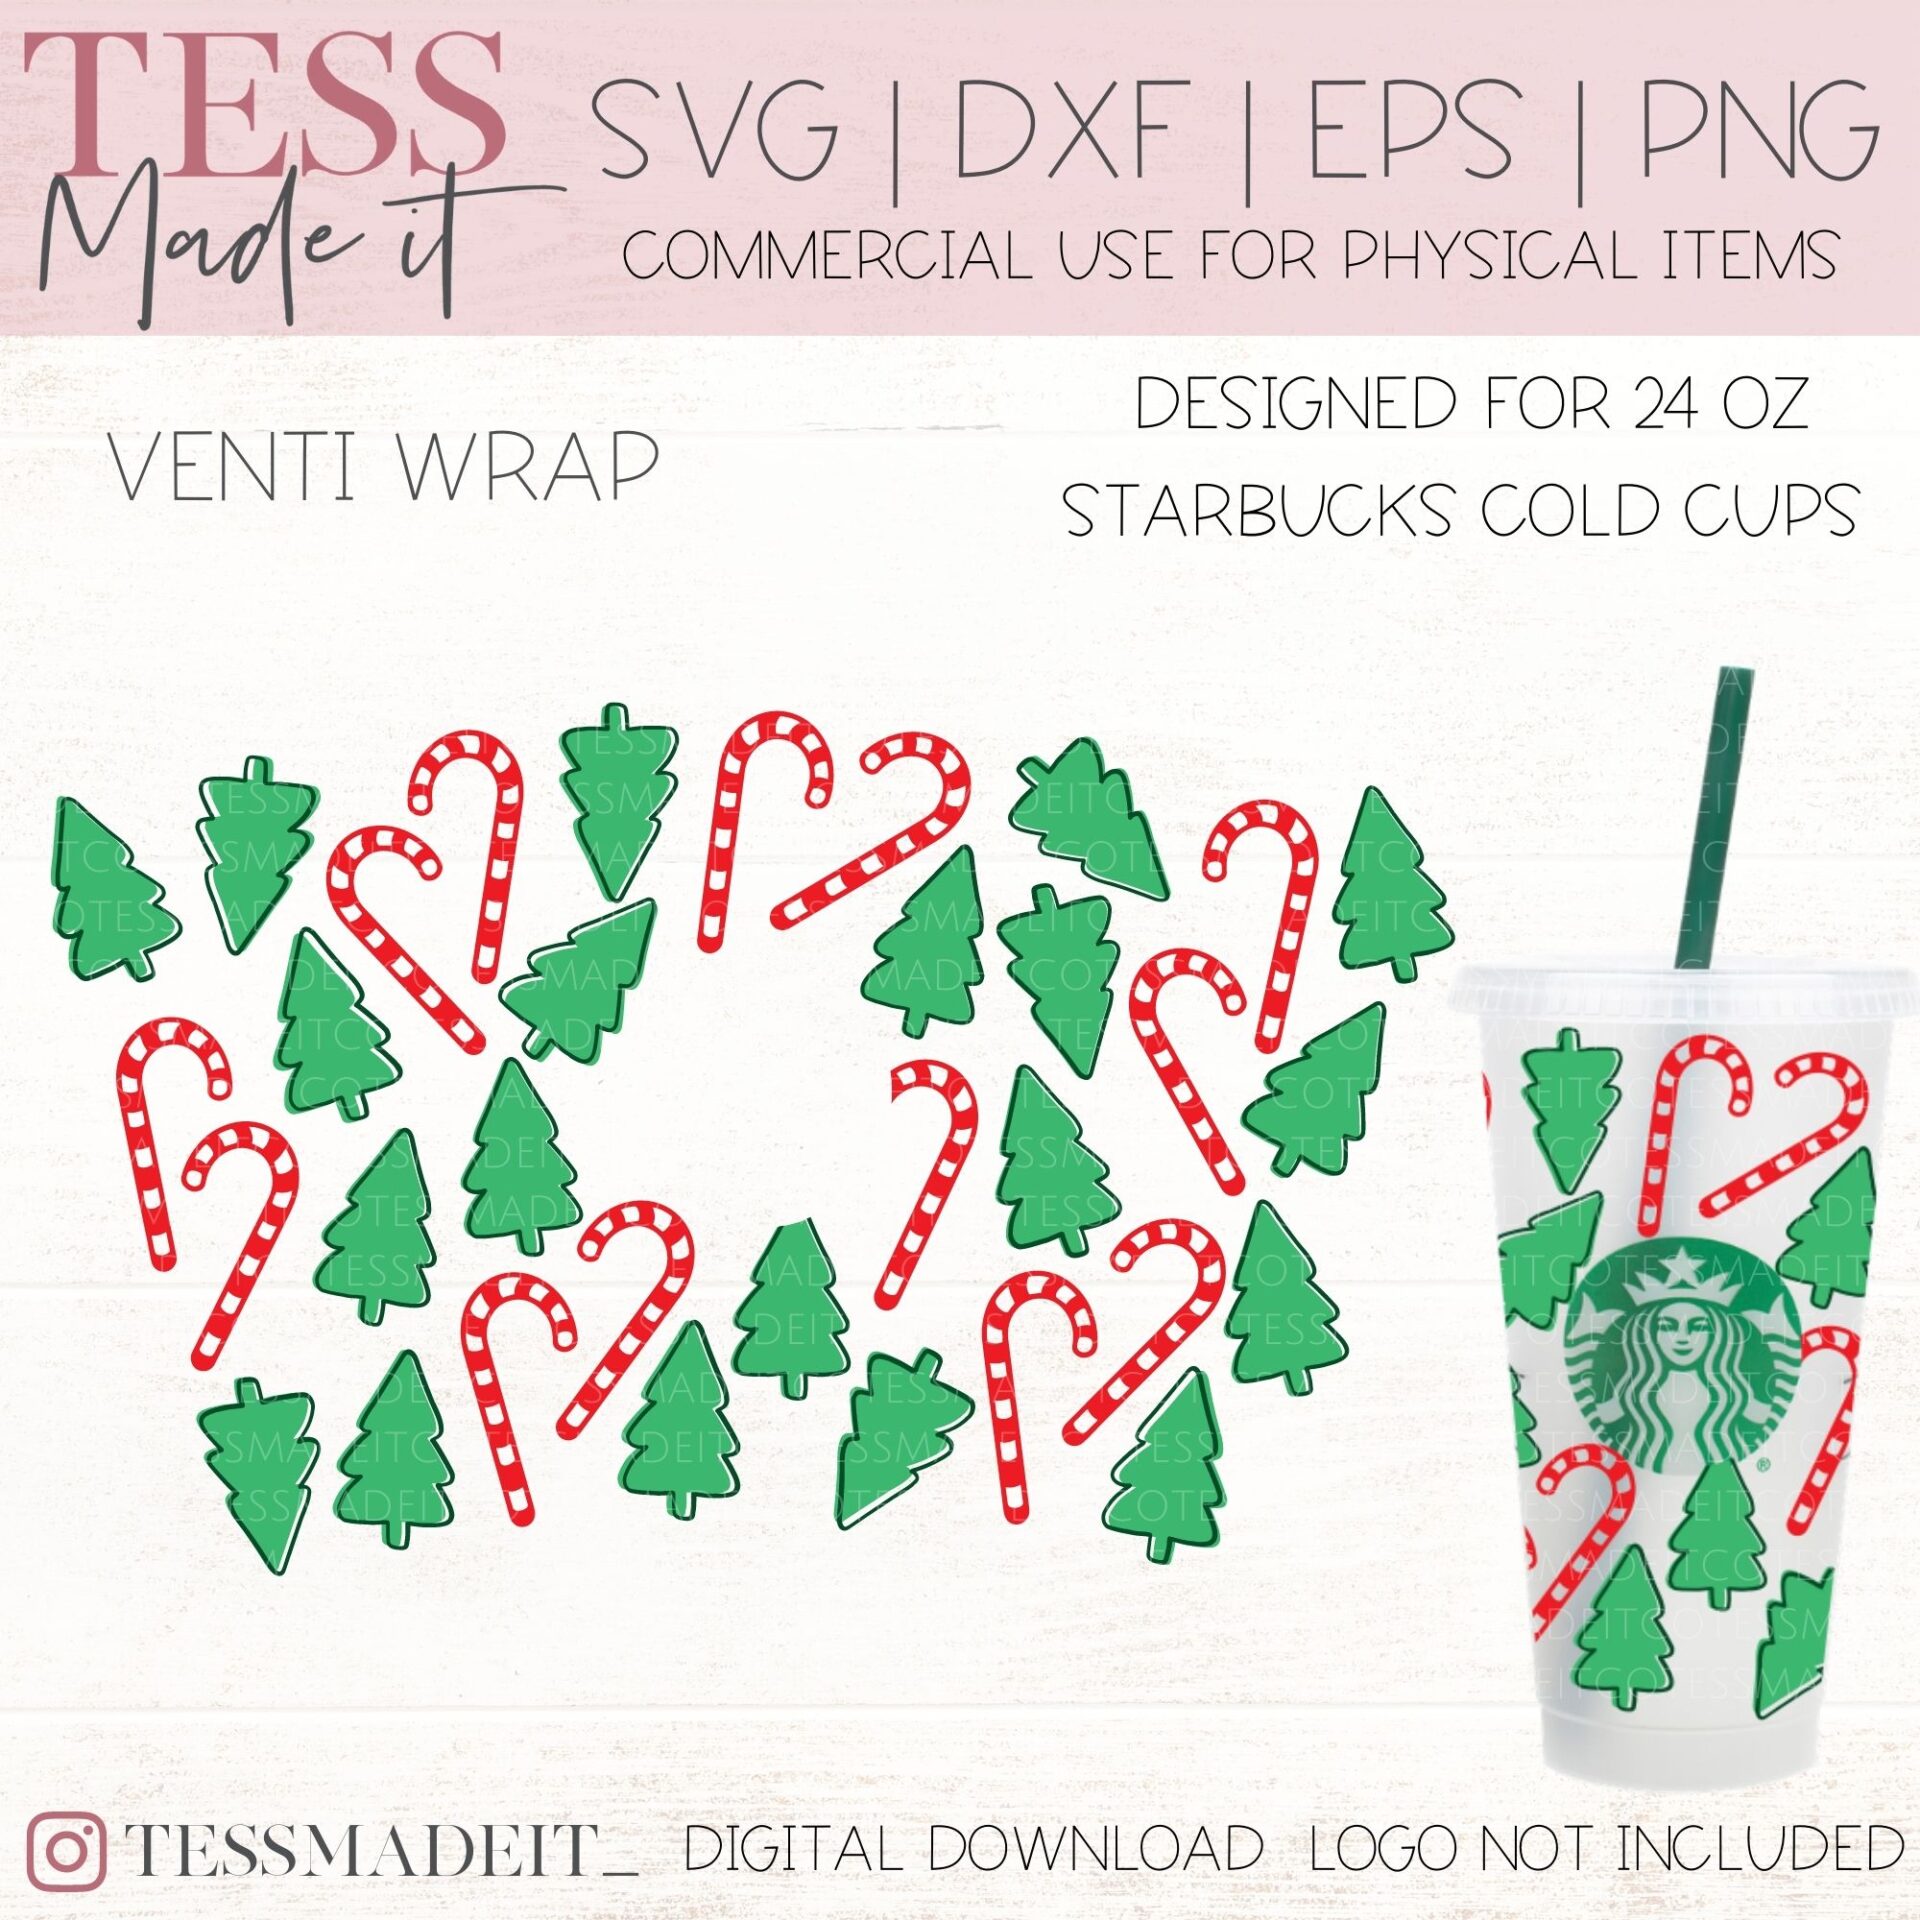 Candy Cane SVG - Christmas Tree Starbucks Cold Cup SVG Tess Made It